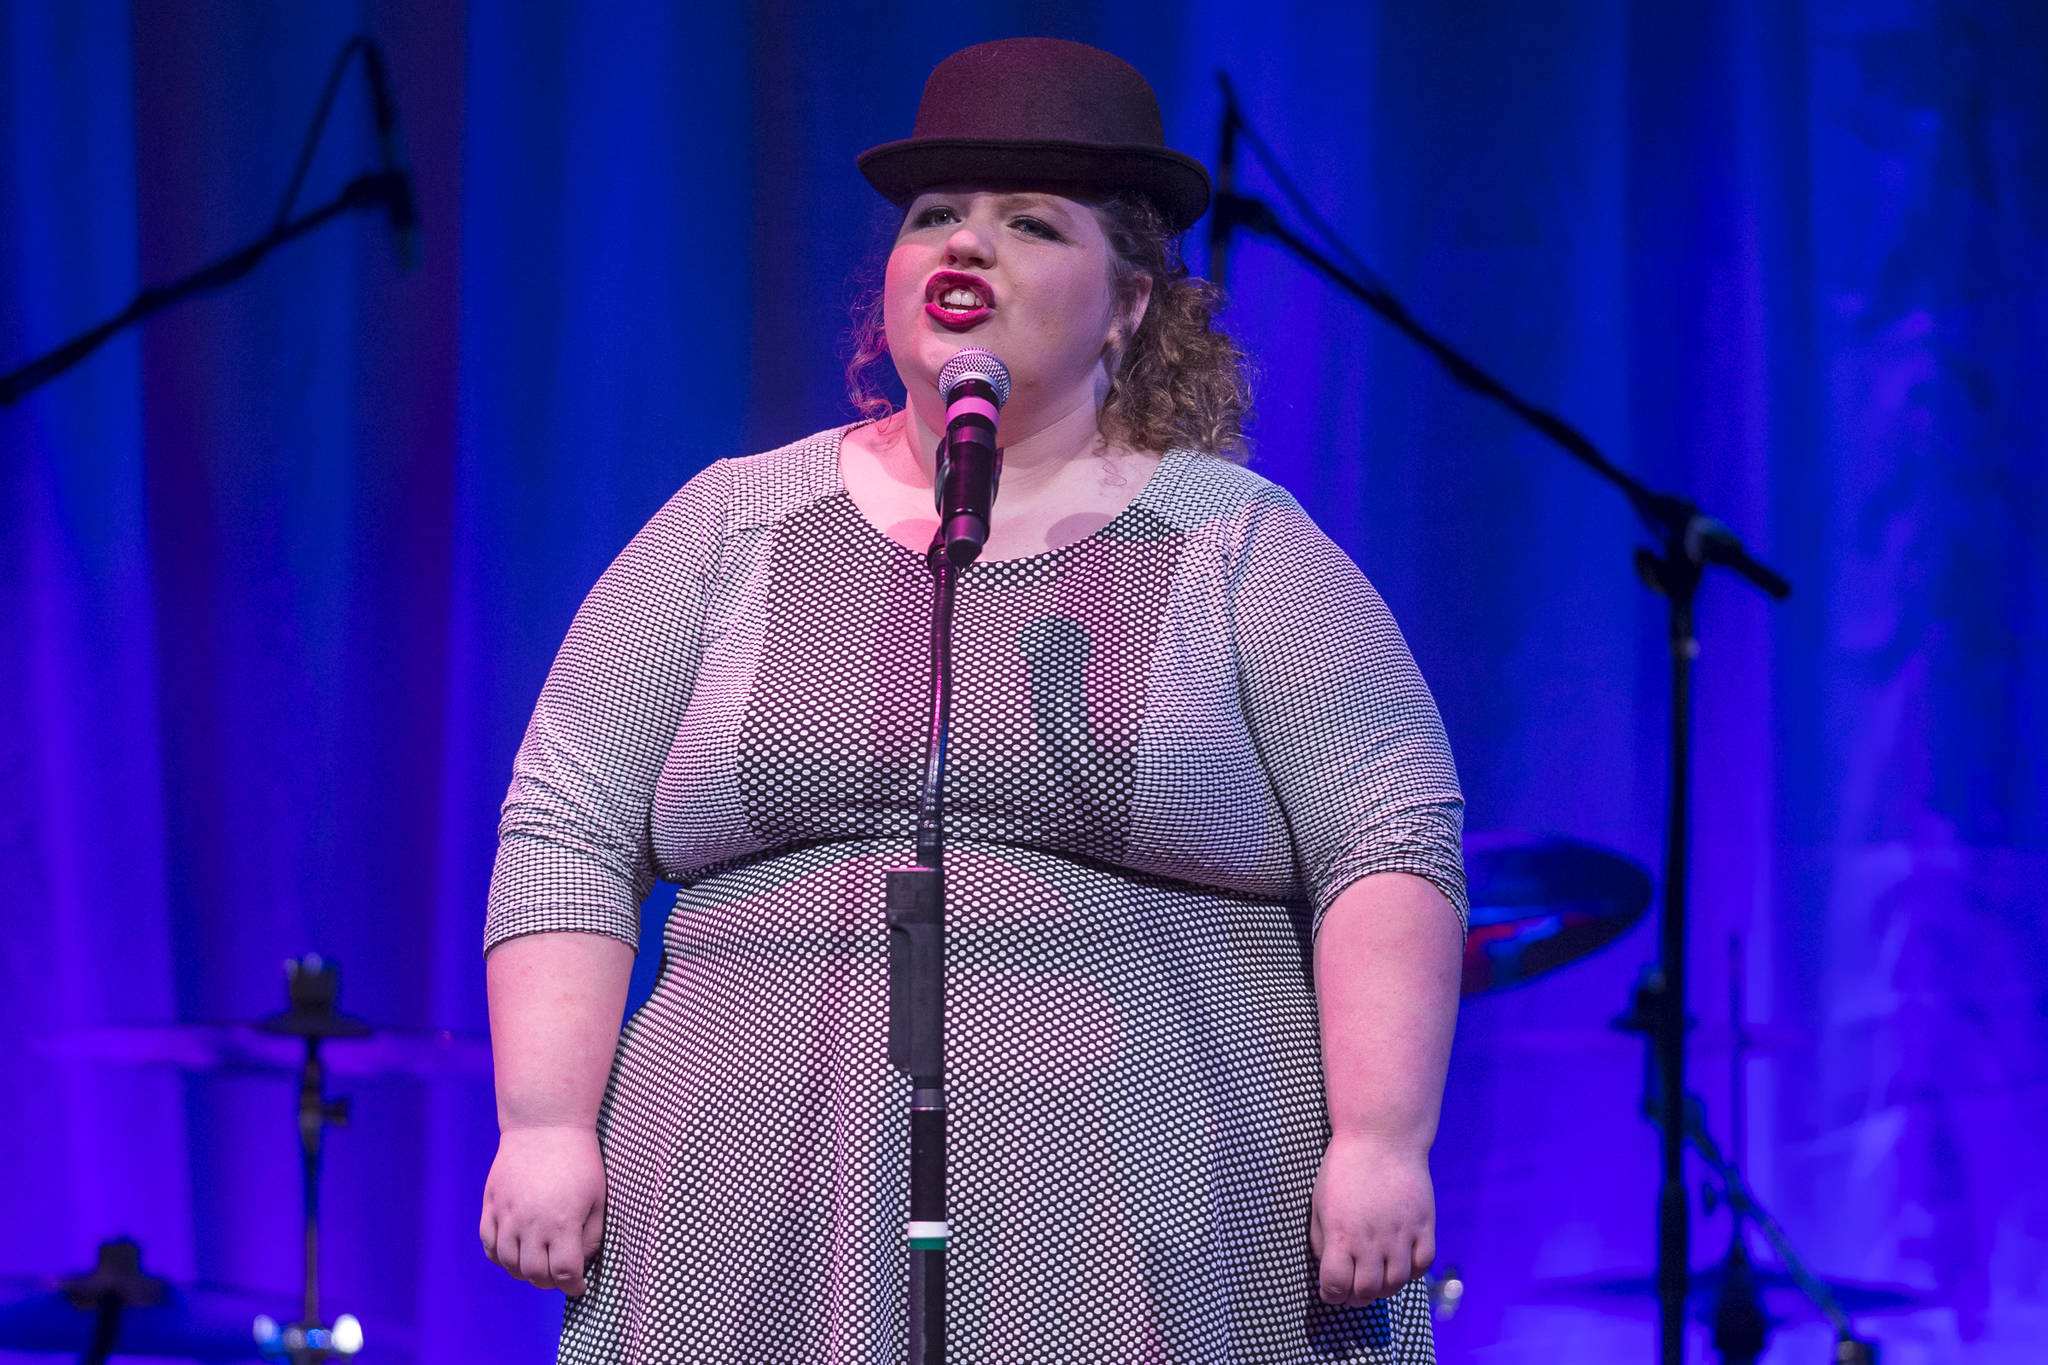 Aria Moore performs at Juneau Lyric Opera’s production of “Who’s Your Diva?” at Centennial Hall on Saturday, Sept. 29, 2018. (Michael Penn | Juneau Empire)